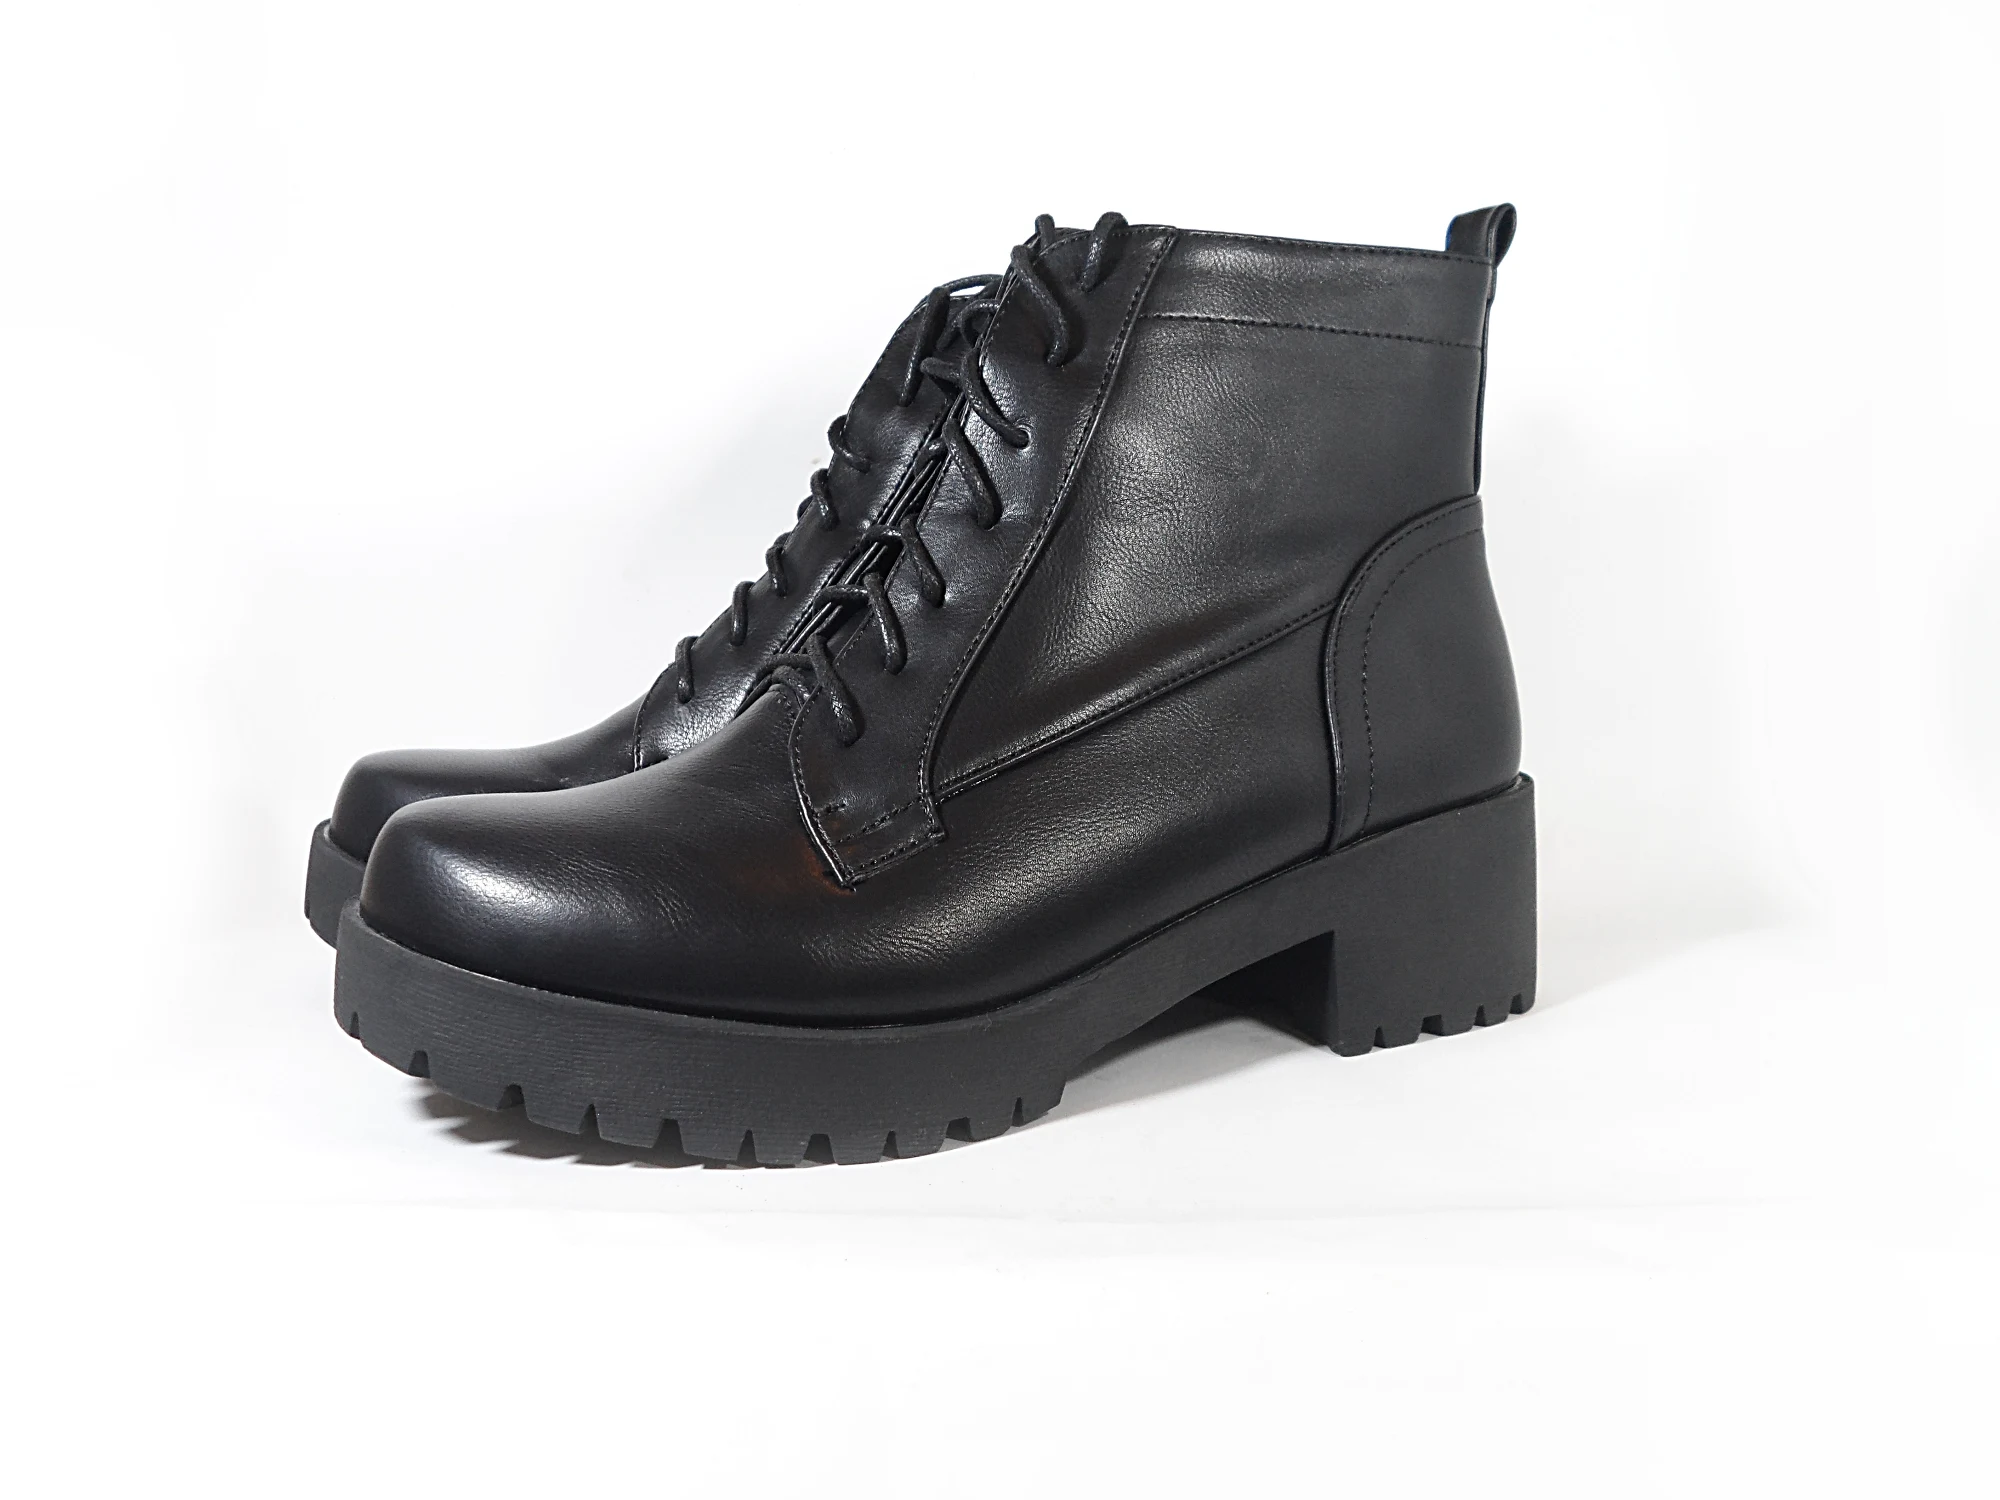 close-up of a black combat boots on a white background in the studio